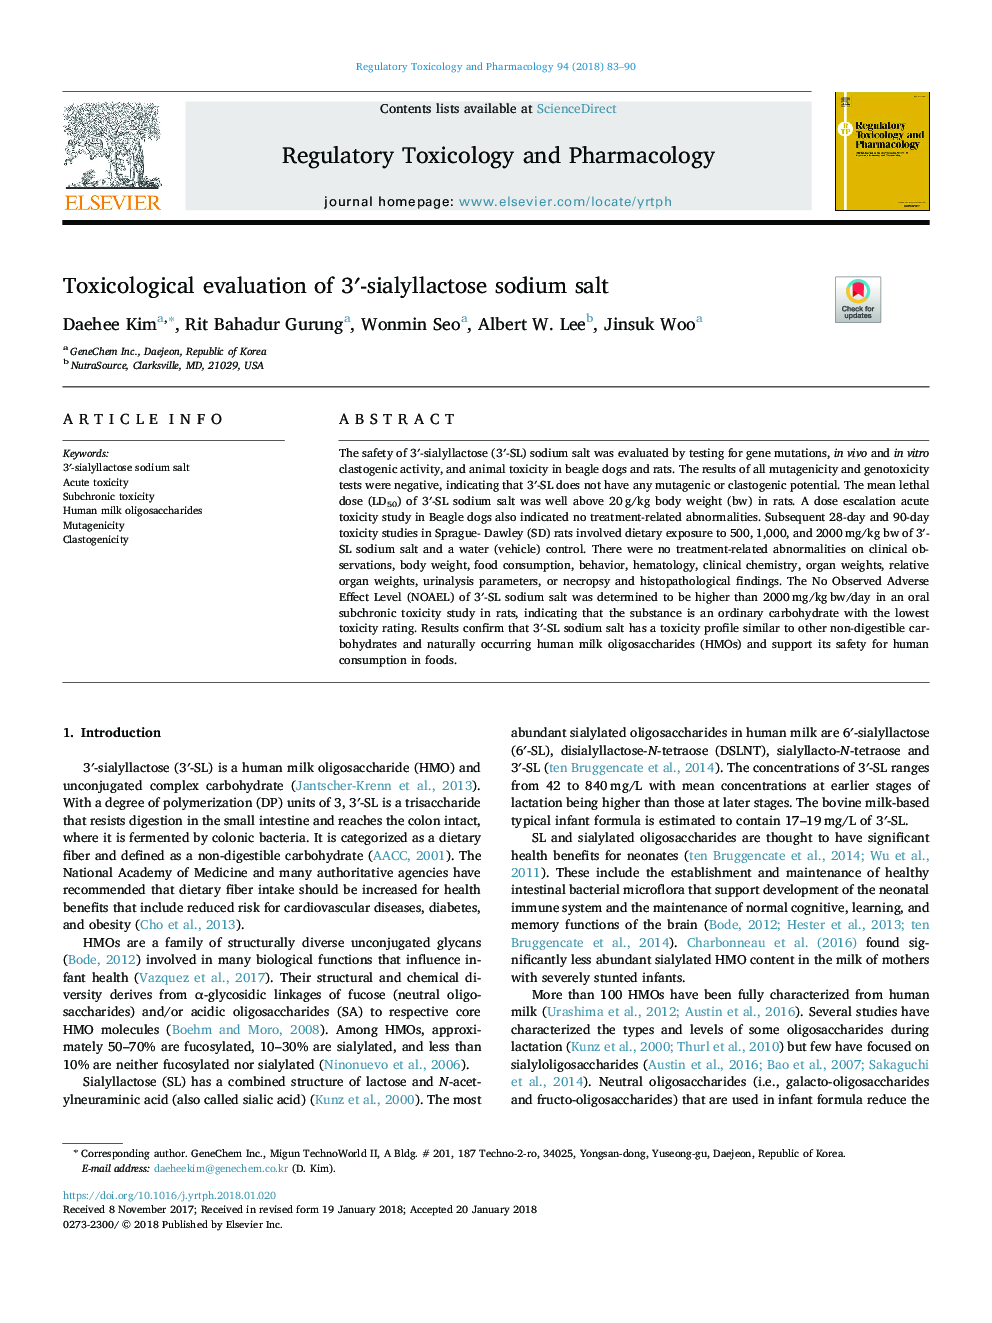 Toxicological evaluation of 3â²-sialyllactose sodium salt